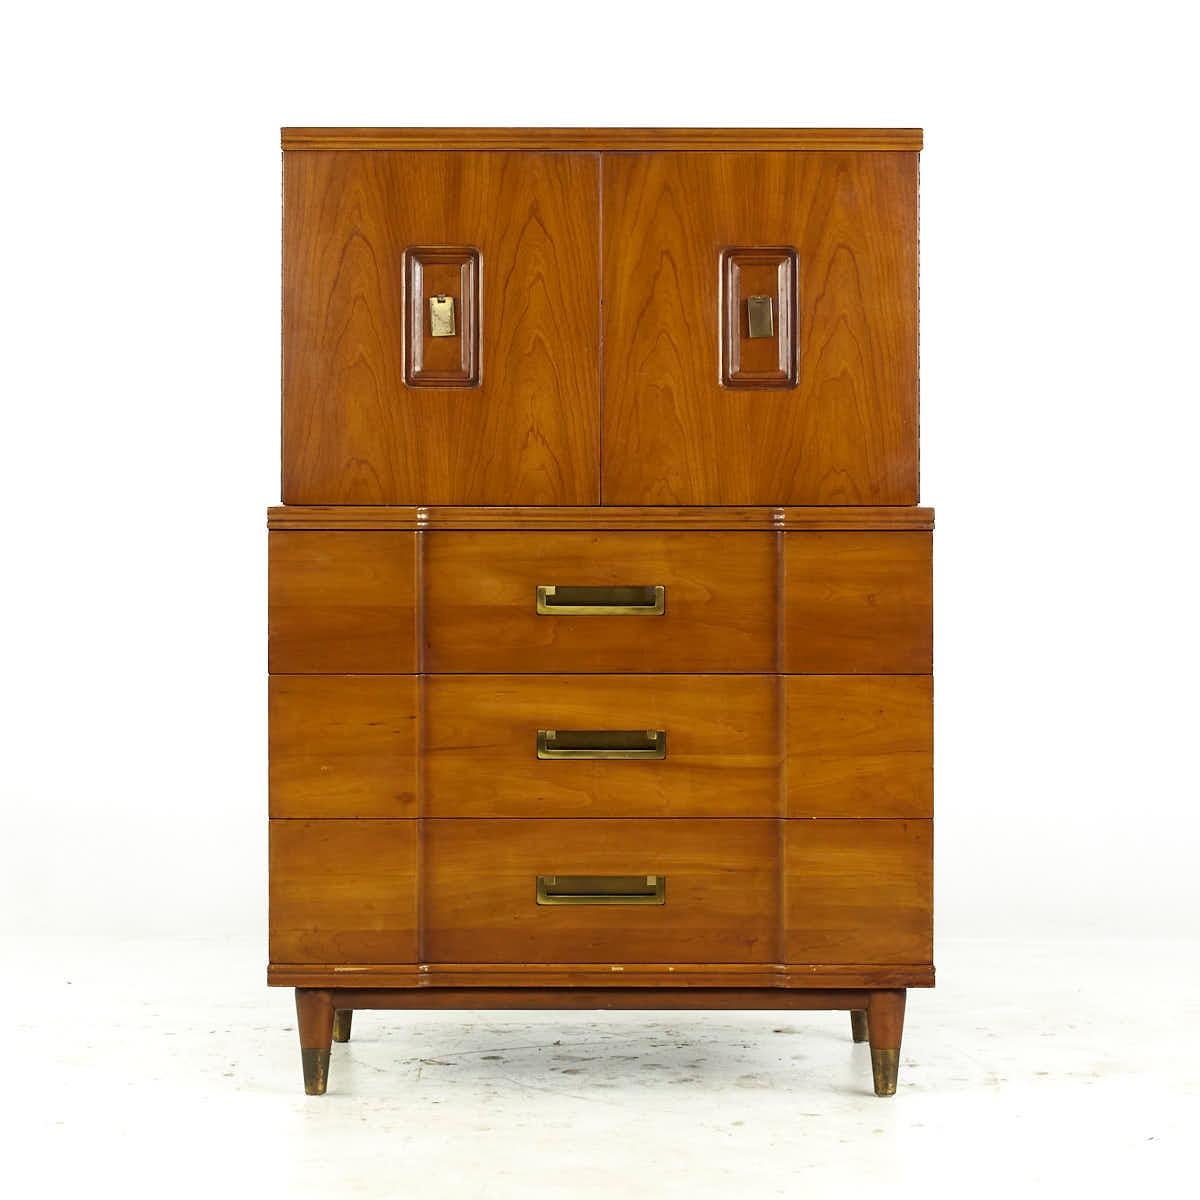 John Widdicomb Mid Century Walnut and Brass Highboy Dresser

This highboy measures: 36 wide x 21 deep x 52.5 inches high

All pieces of furniture can be had in what we call restored vintage condition. That means the piece is restored upon purchase